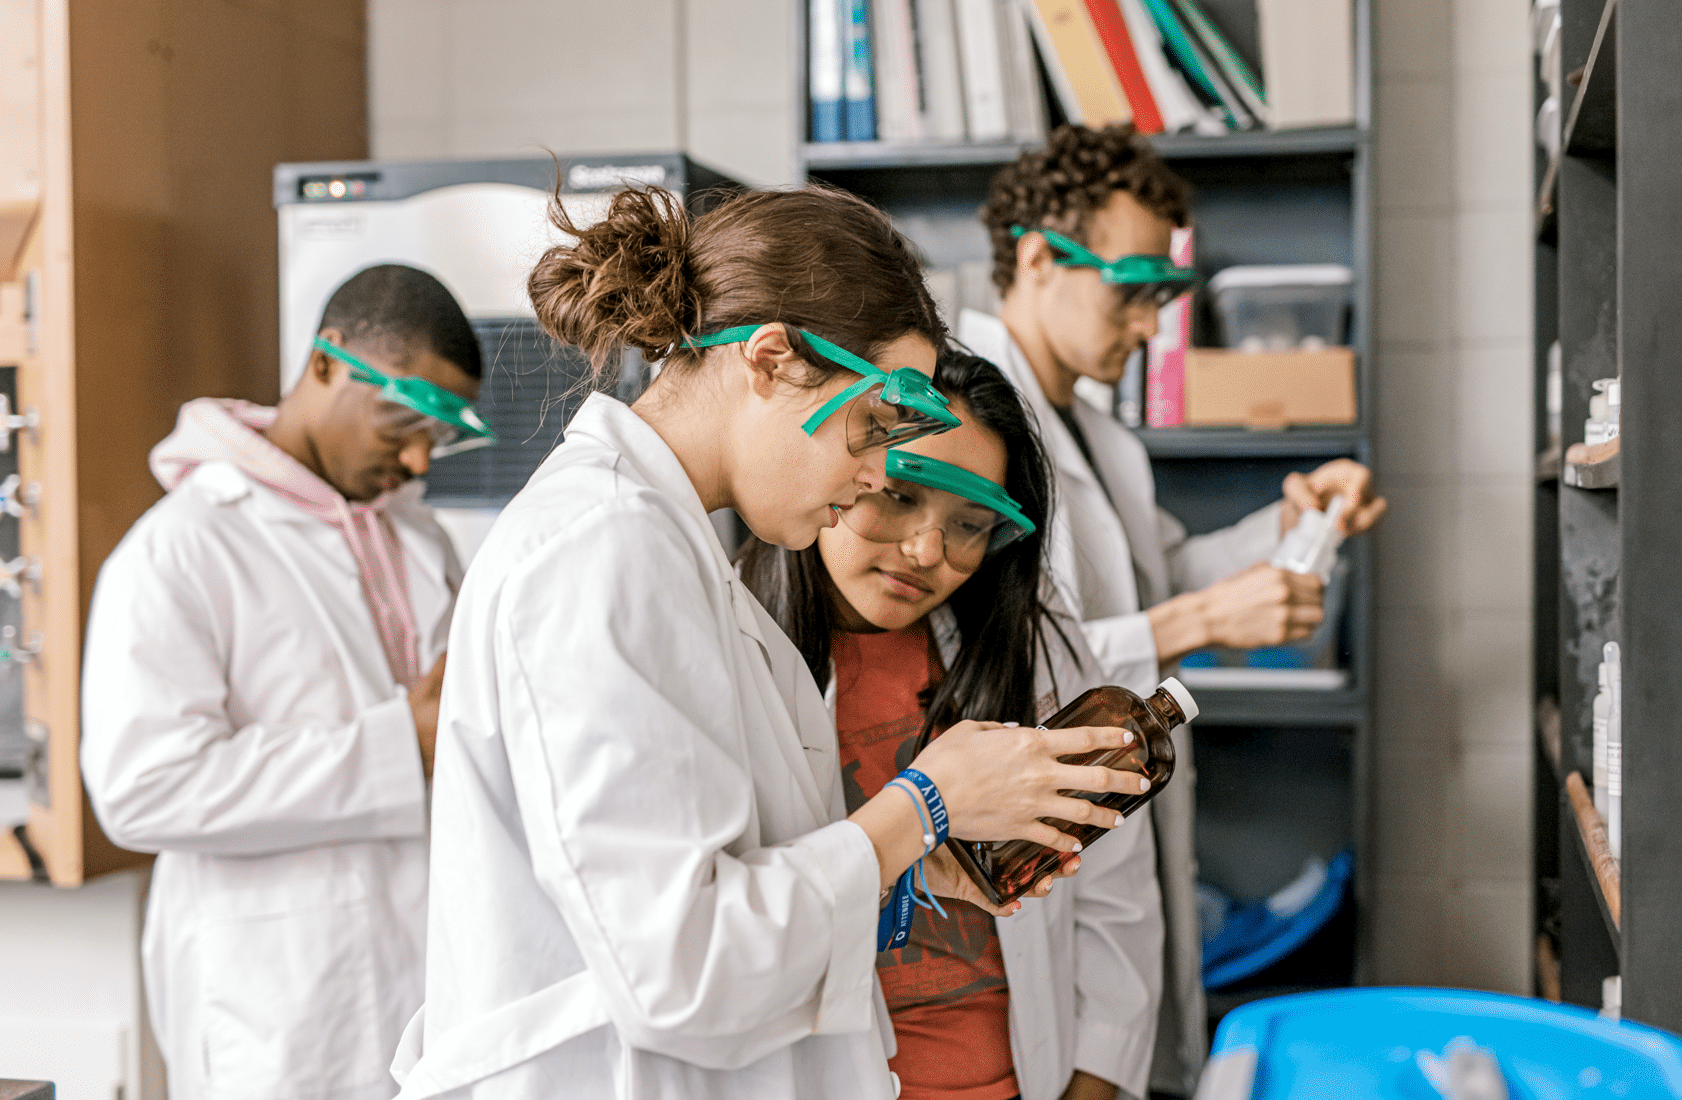 Group of students with lab coats in lab analyzing class materials